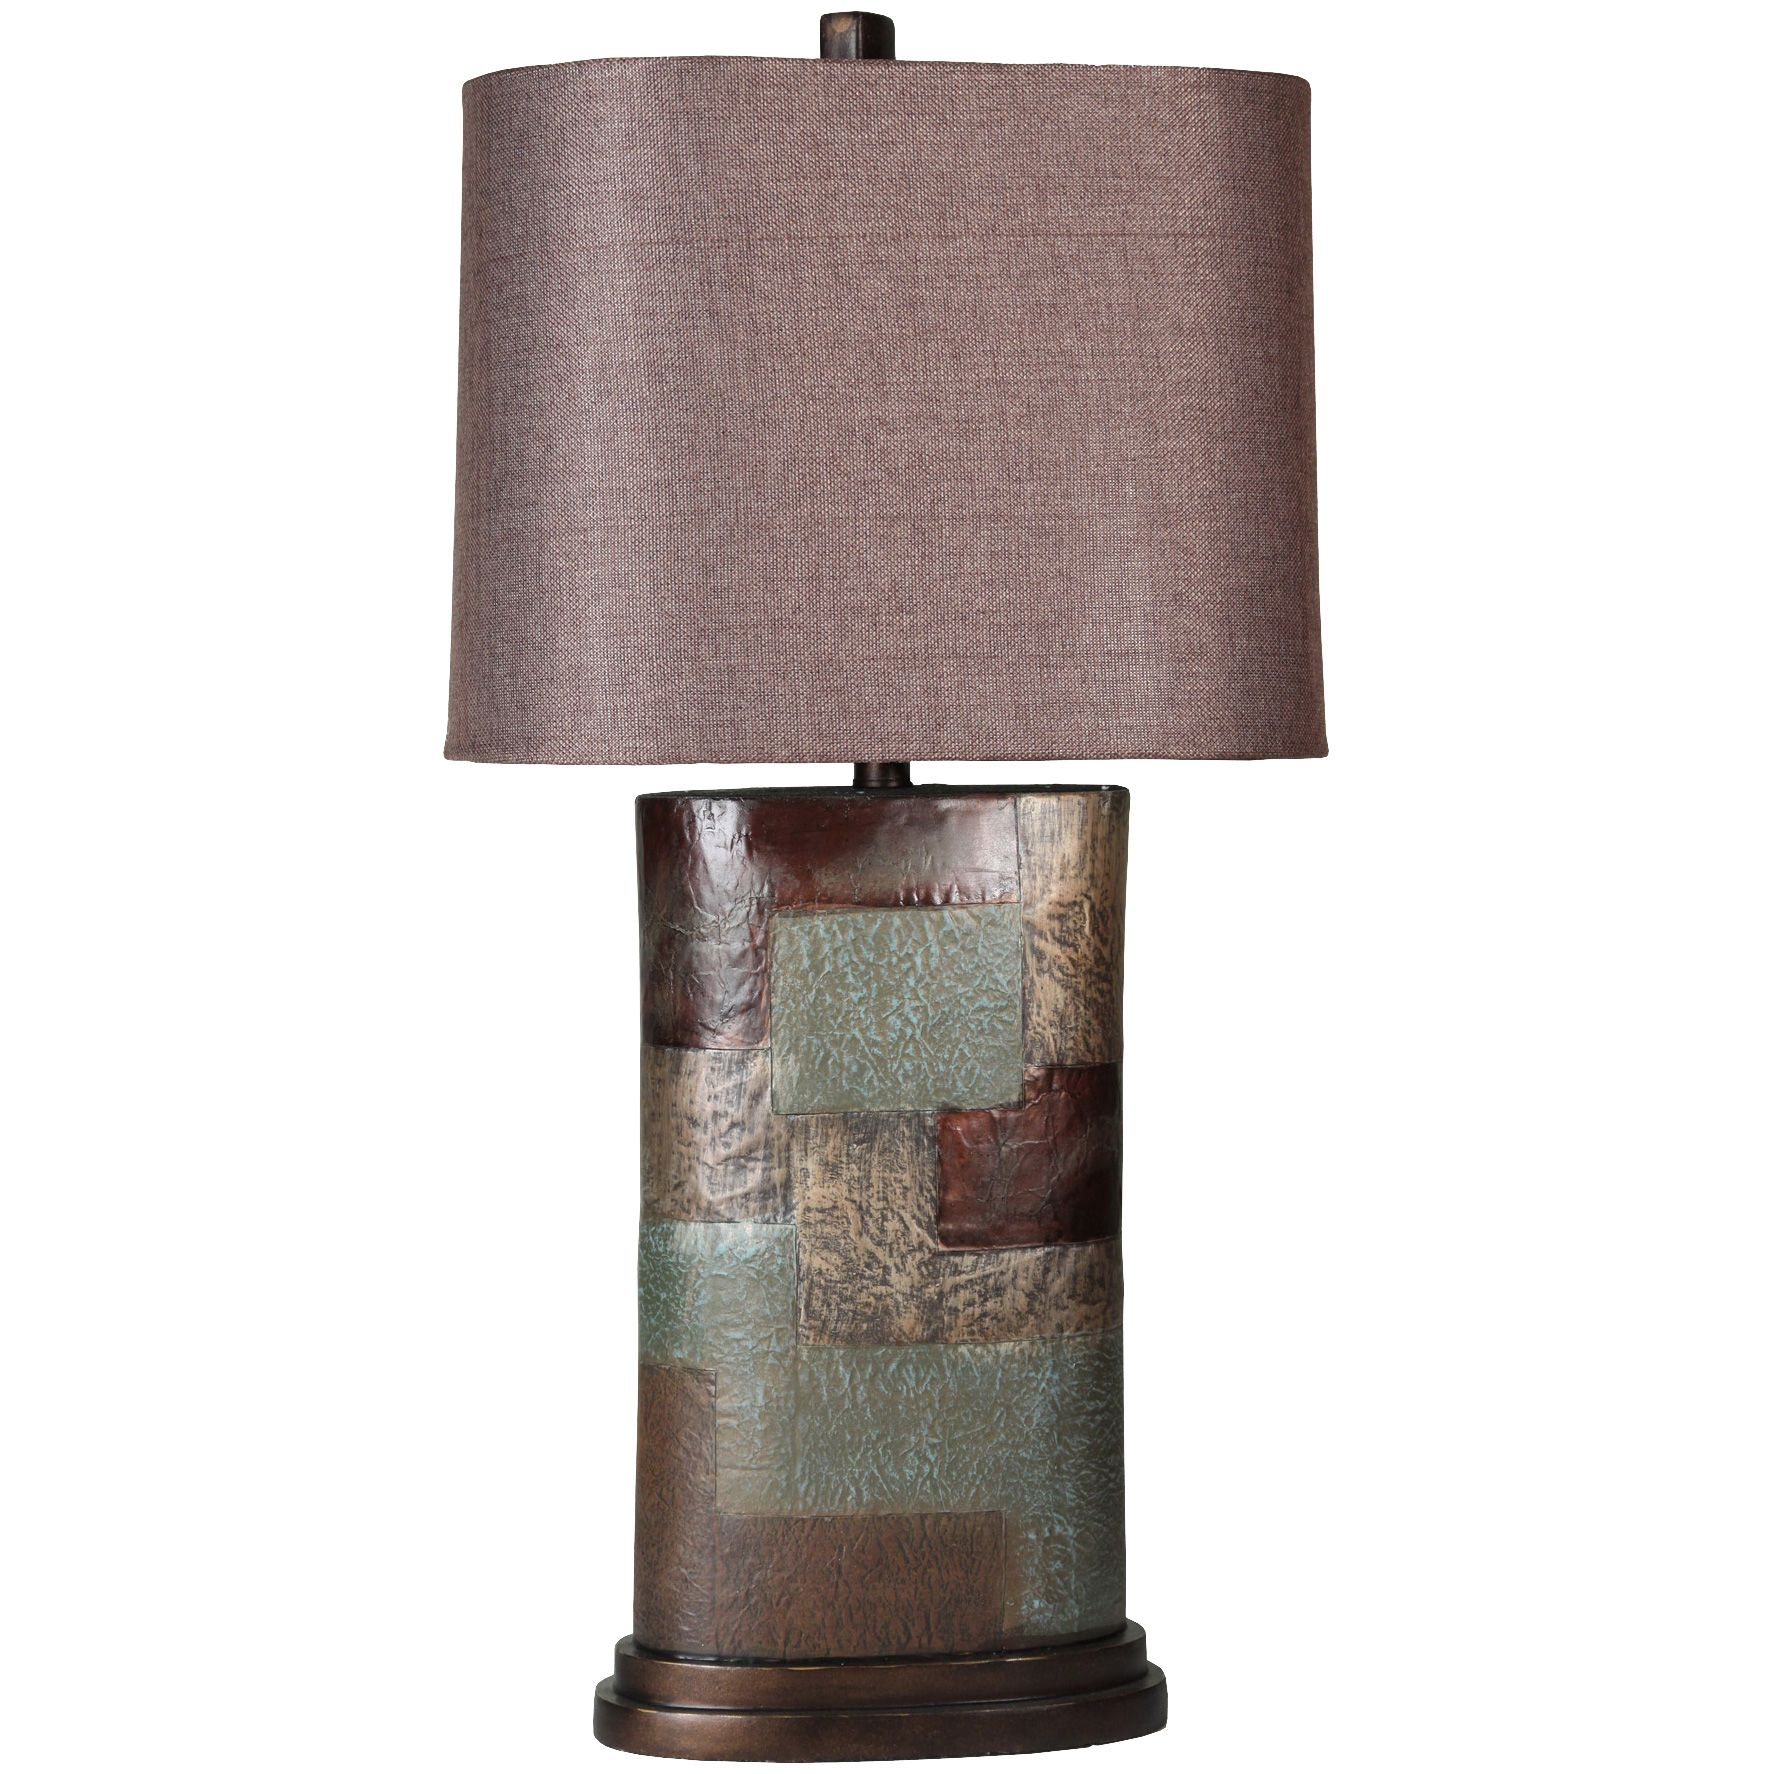 Grafton Patchwork Table Lamp Products In 2019 Table Lamp inside sizing 1774 X 1774